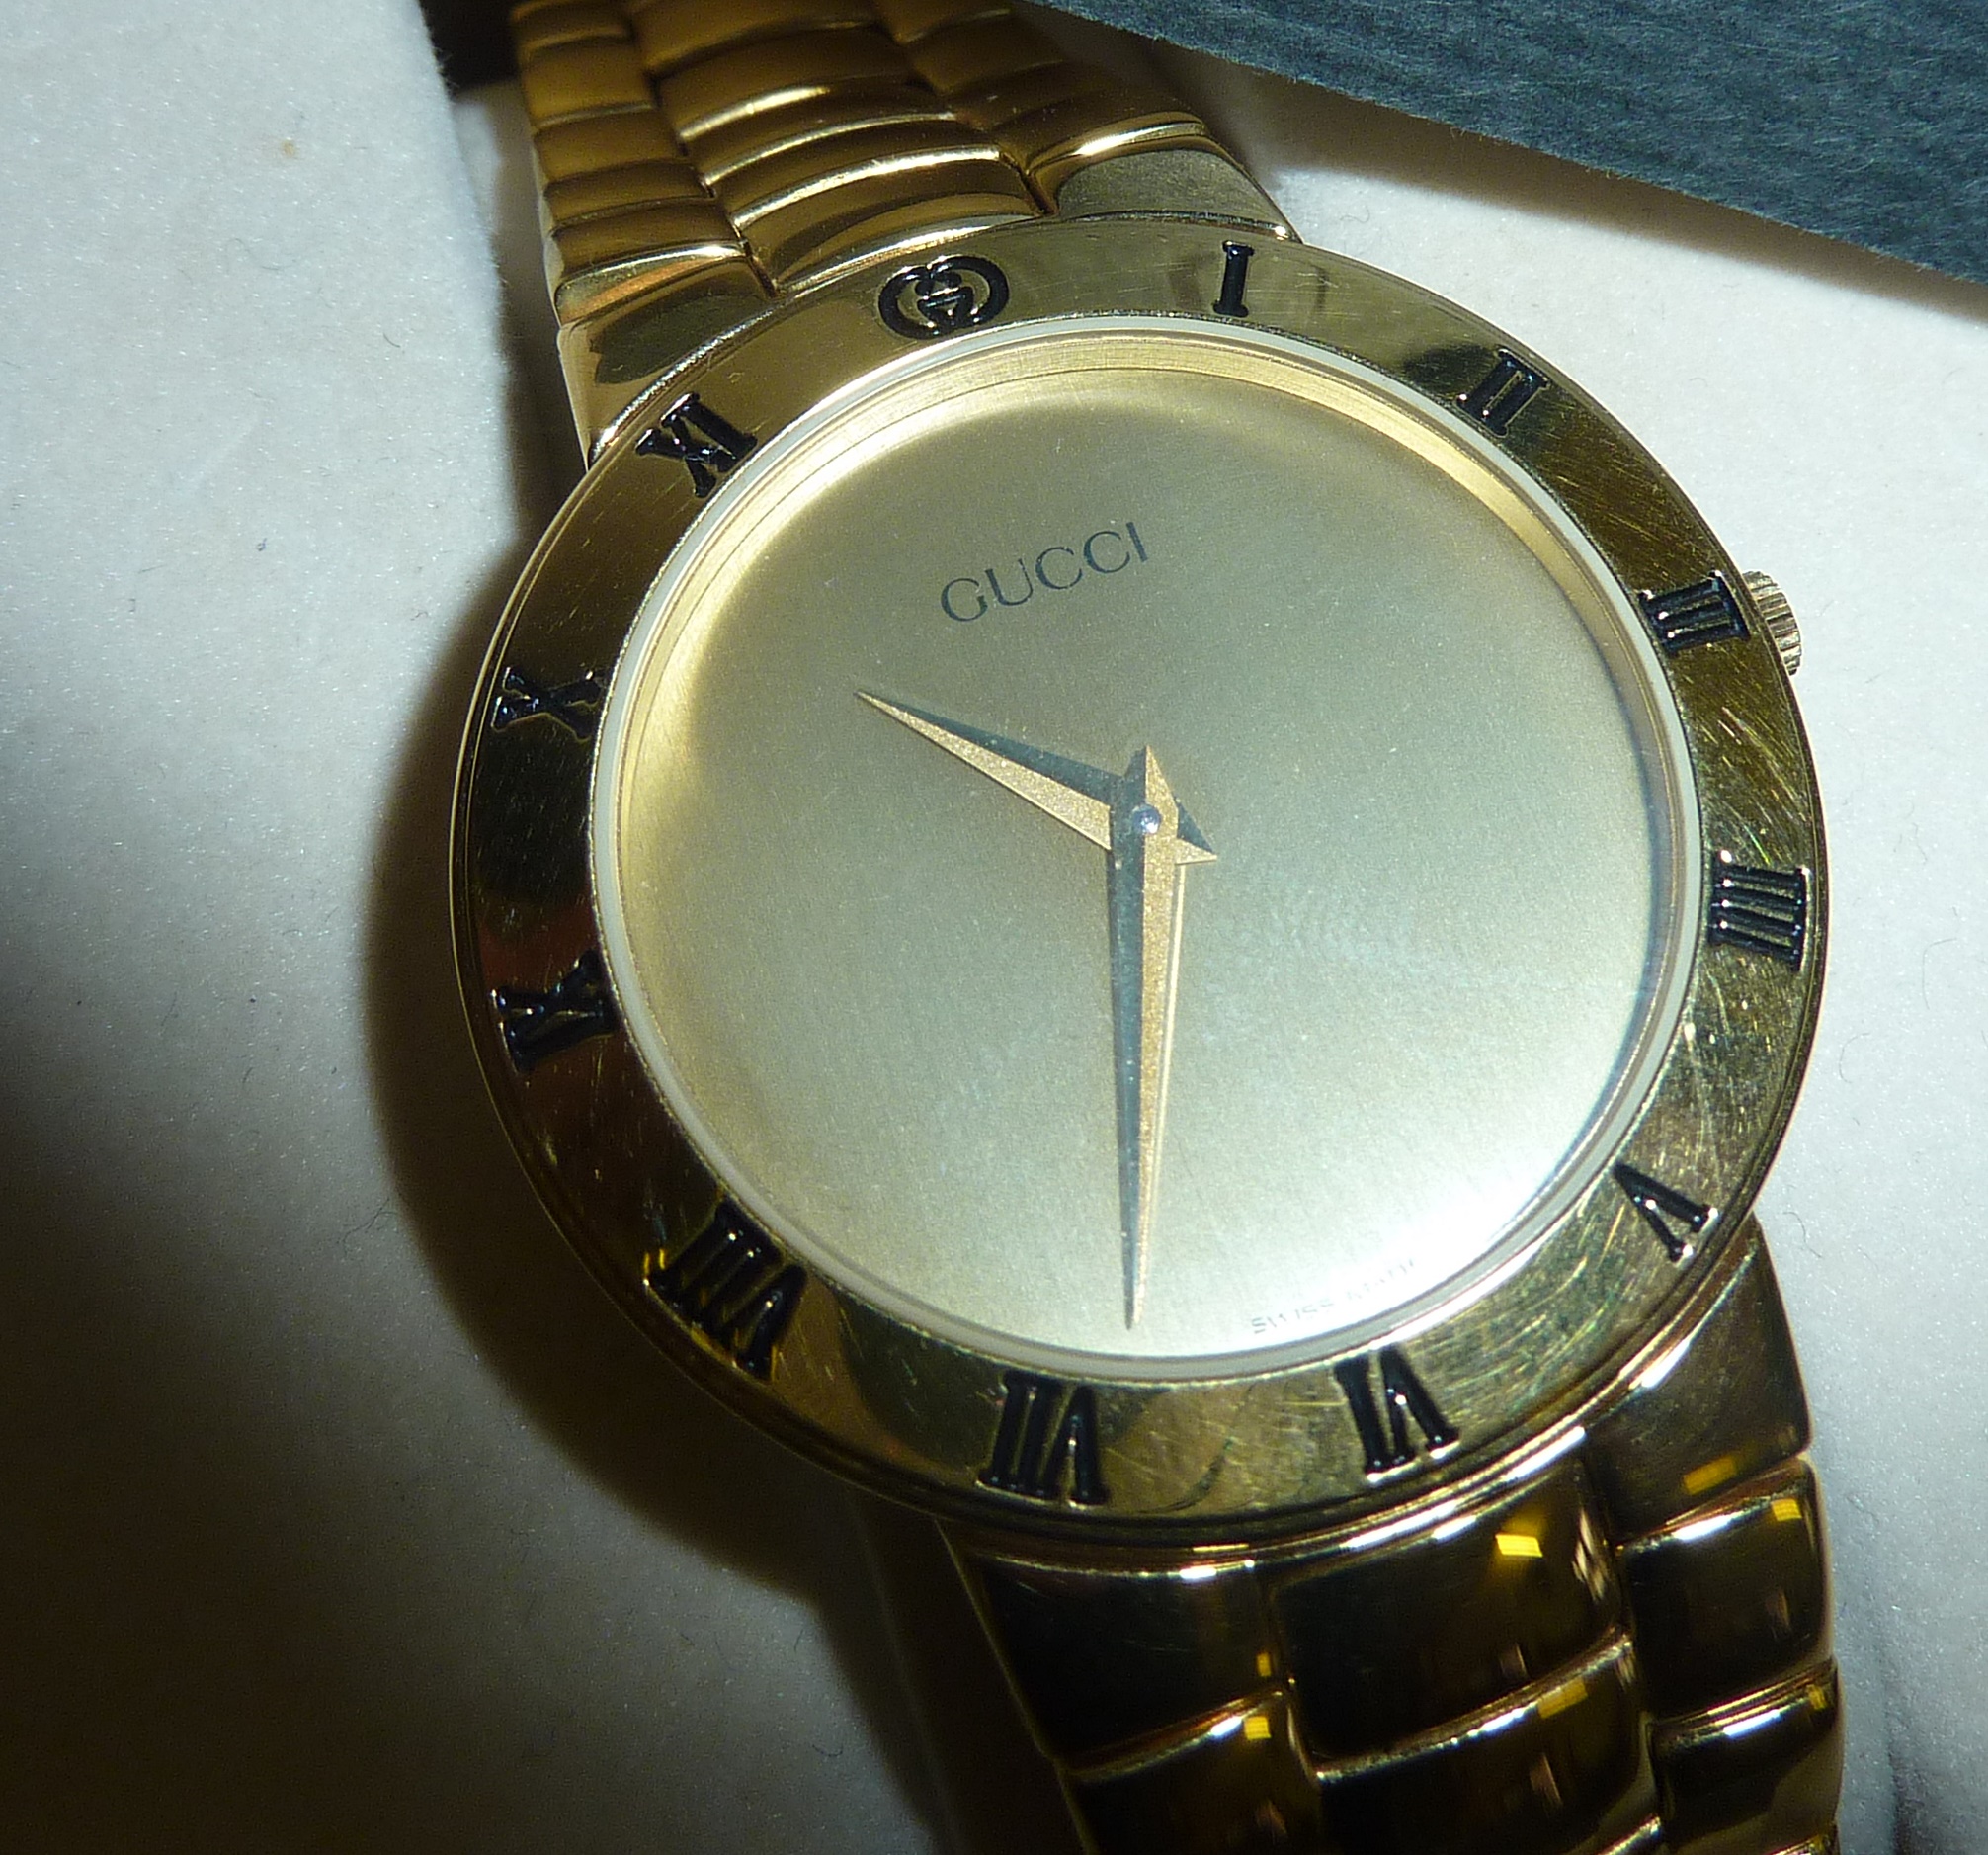 Vintage Gucci 18k gold-plated Champagne ladies wrist watch, very good condition, in box - Image 2 of 2